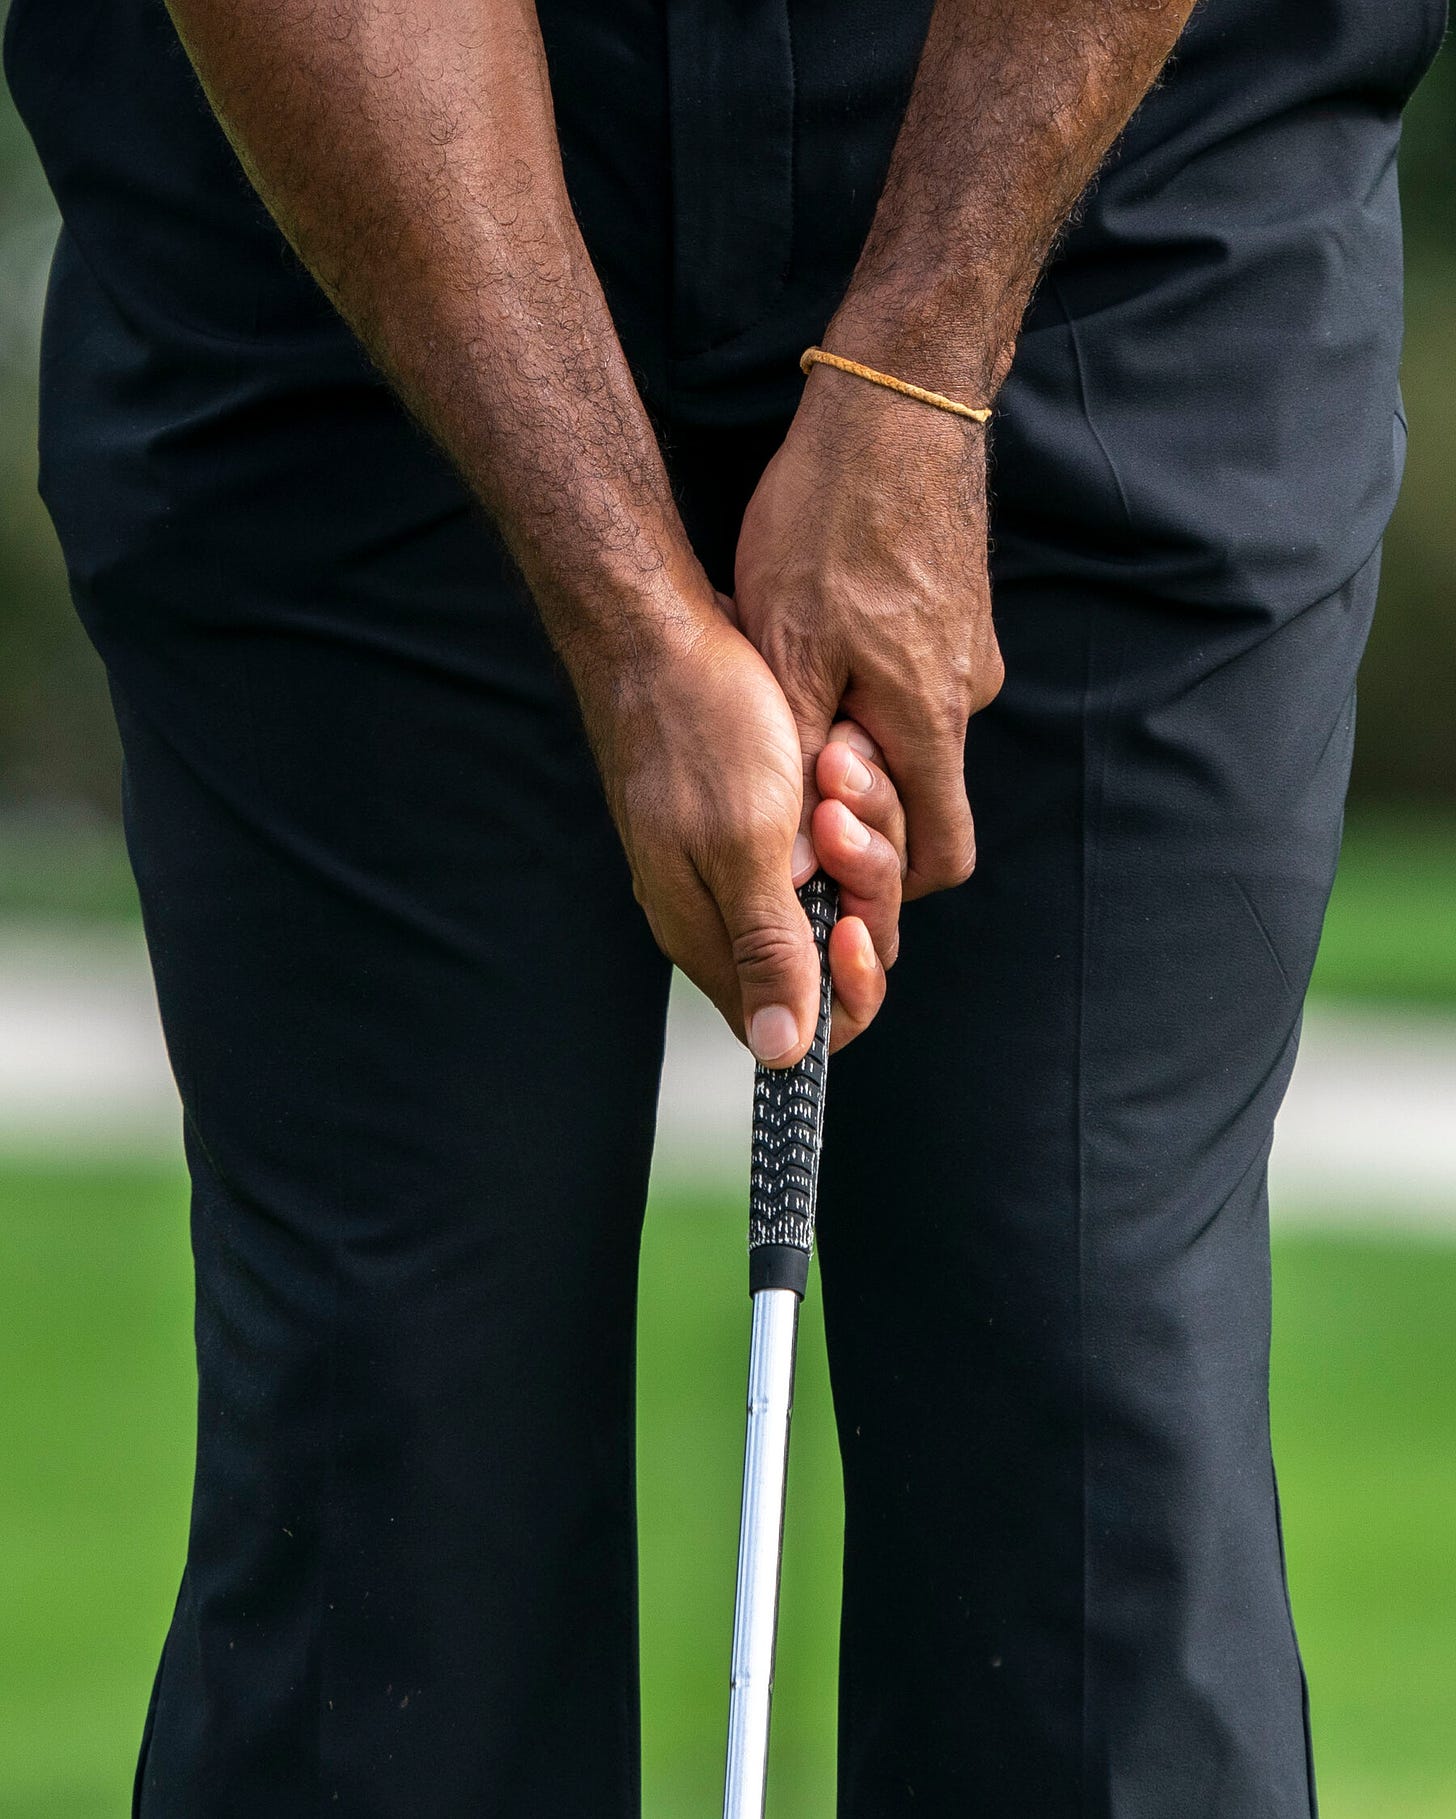 How to Grip a Putter: 9 Ways the Pros Use - The New York Times